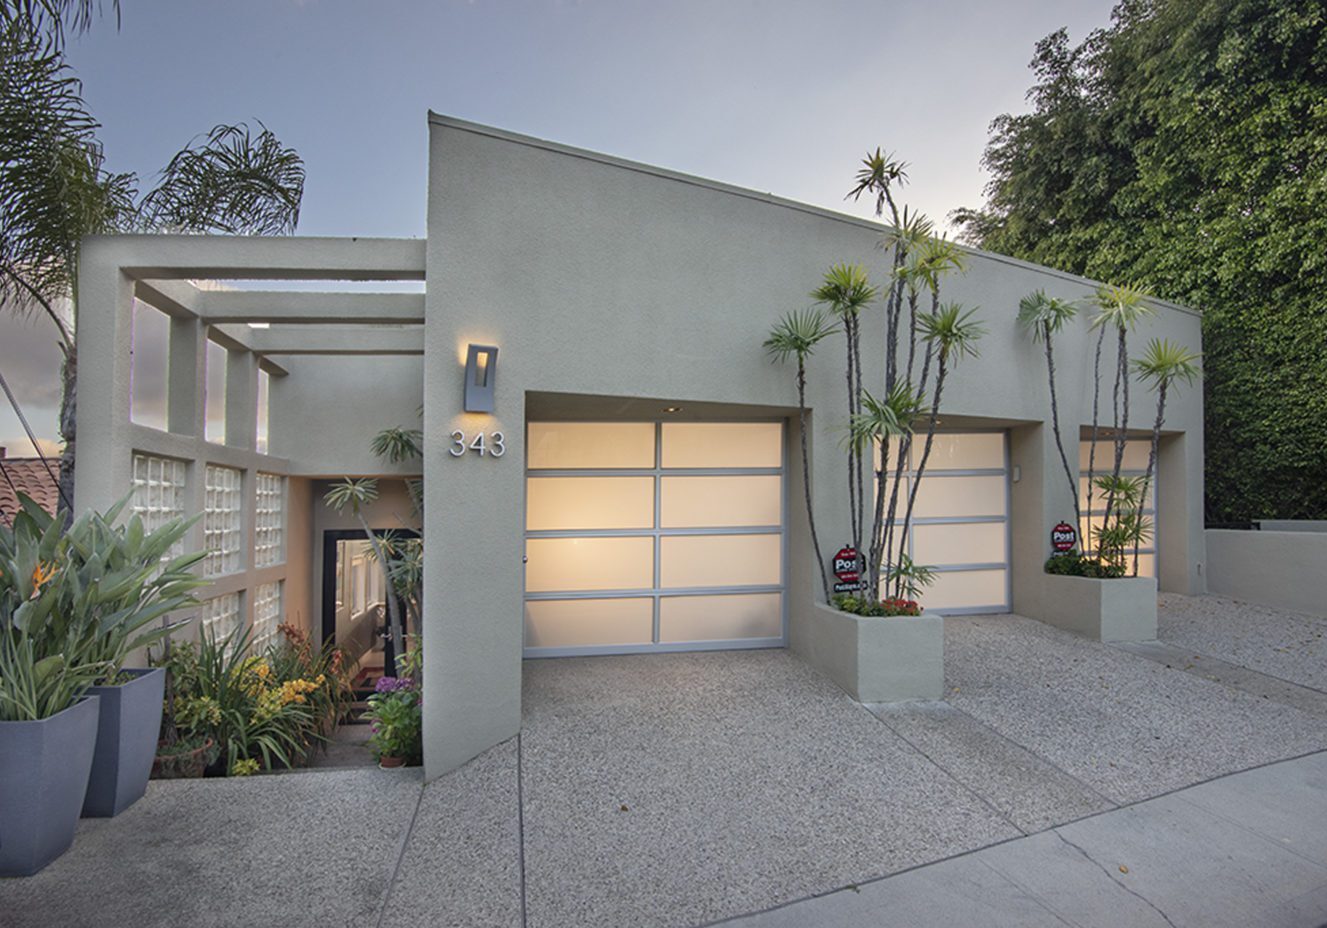 A modern house with two garage doors and plants in the front.